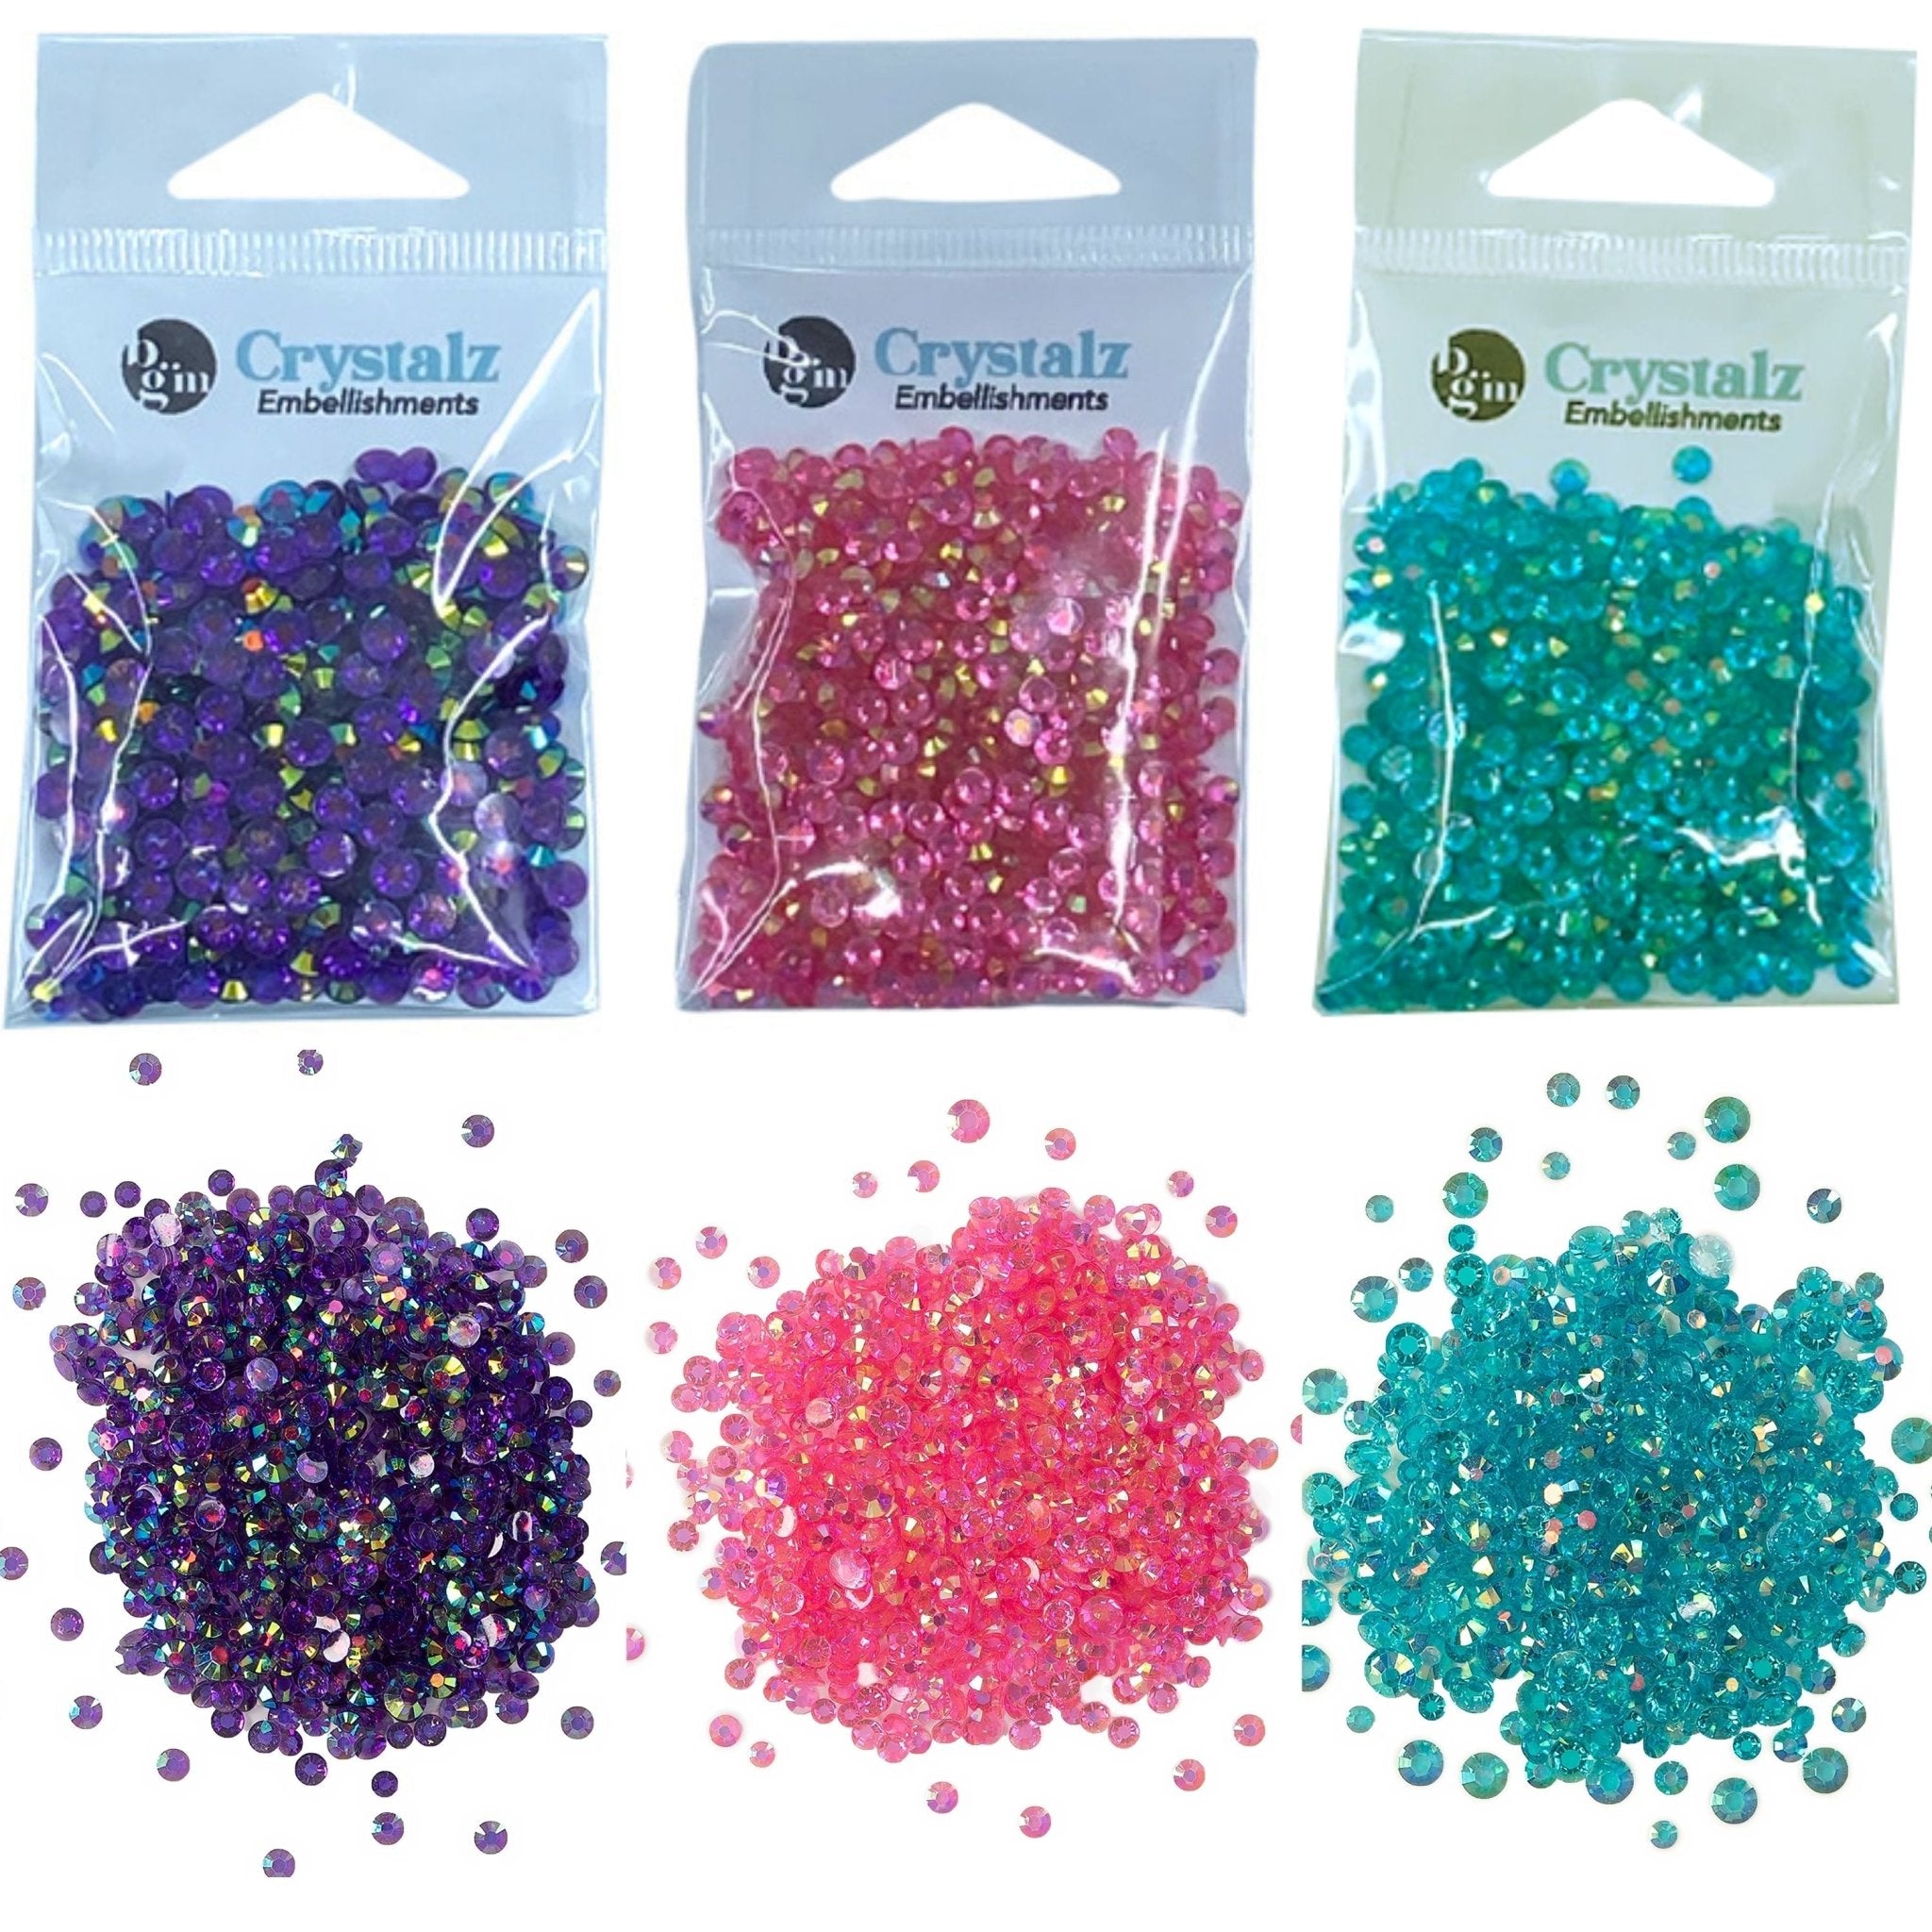 Buttons Galore Crystalz Iridescent Flat Back Gems for DIY Crafts, Scrapbooks, Paper Crafts - Princess Colors 1200 Pieces - Buttons Galore and More